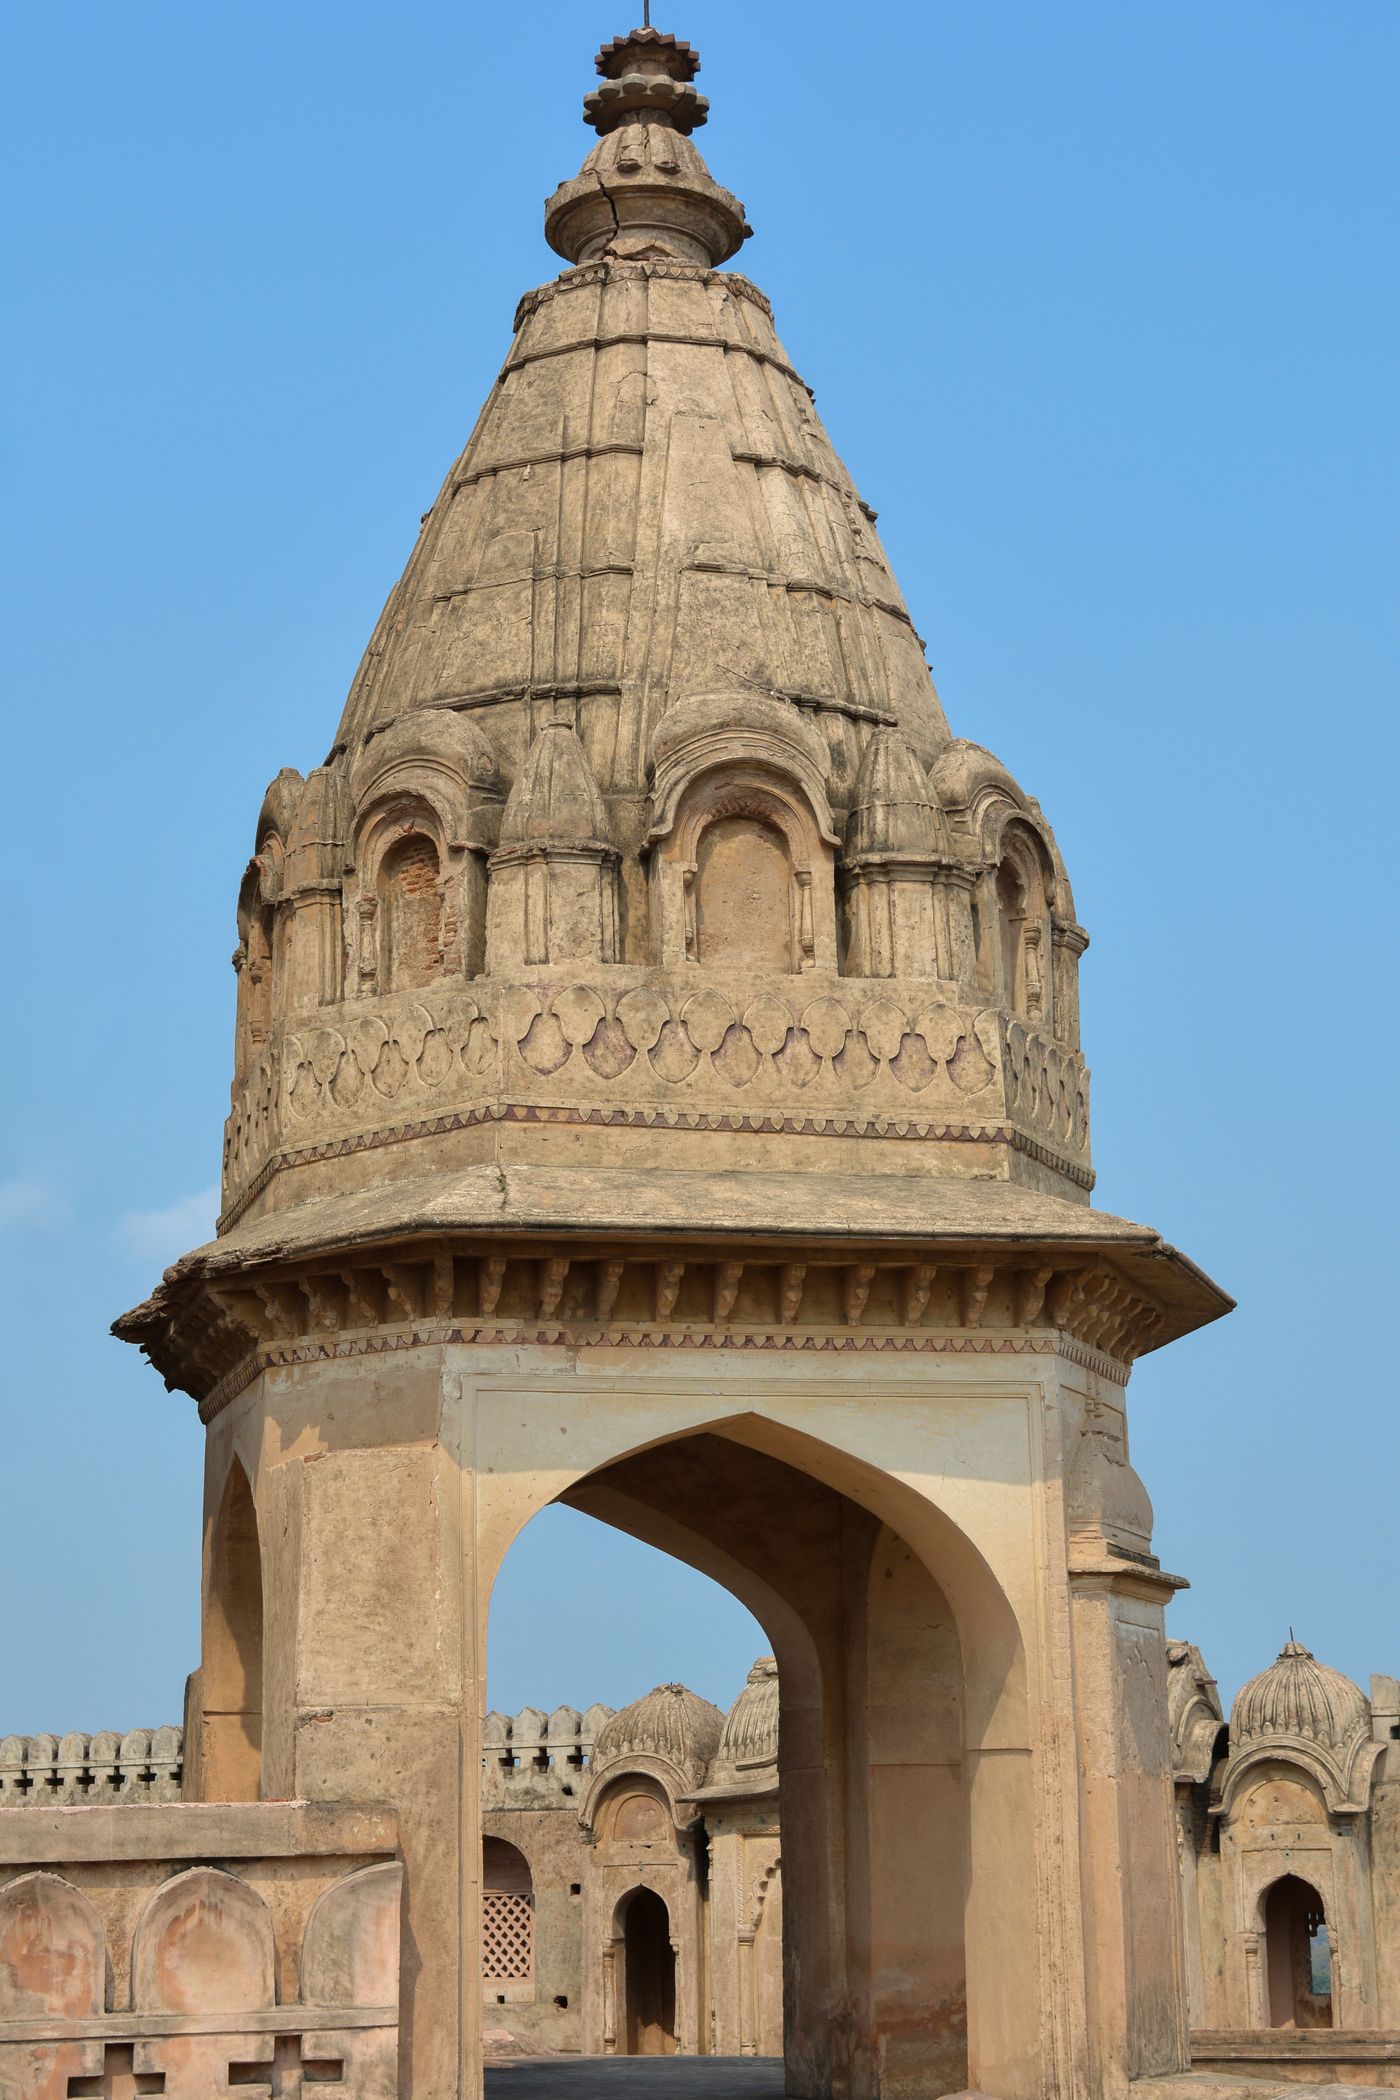 A tower located in the courtyard of Lakshmi Narayan temple in Orchha, covered with several kiosks 